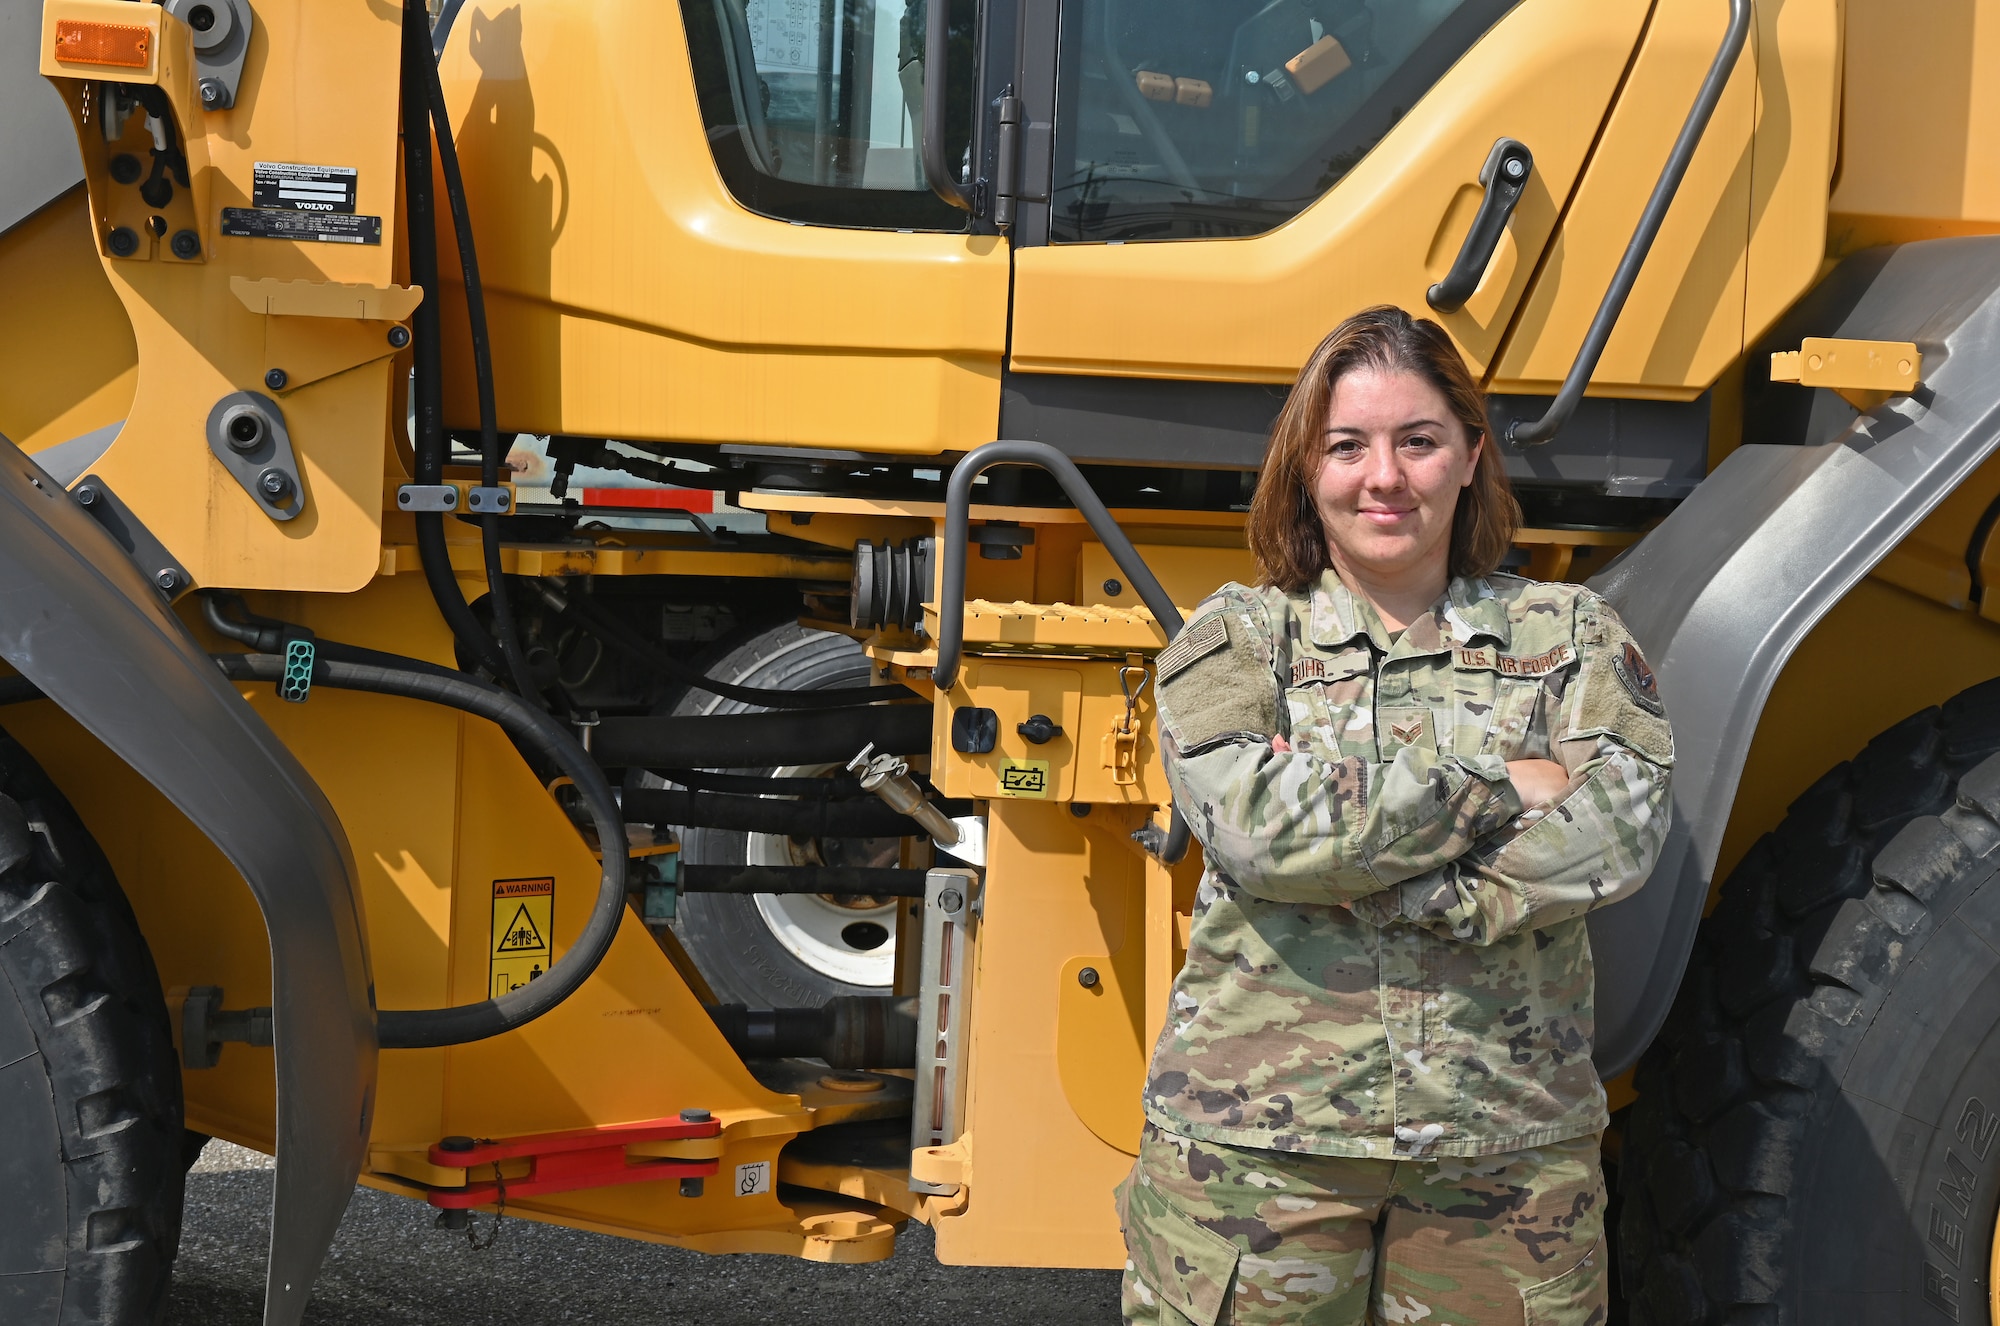 U.S. Air Force Senior Airman Alicia Buhr, a structures journeyman assigned to the 175th Civil Engineer Squadron, Maryland Air National Guard, poses for a photograph next to a loader at Warfield Air National Guard Base at Martin State Airport in Middle River, Maryland, June 5, 2022.